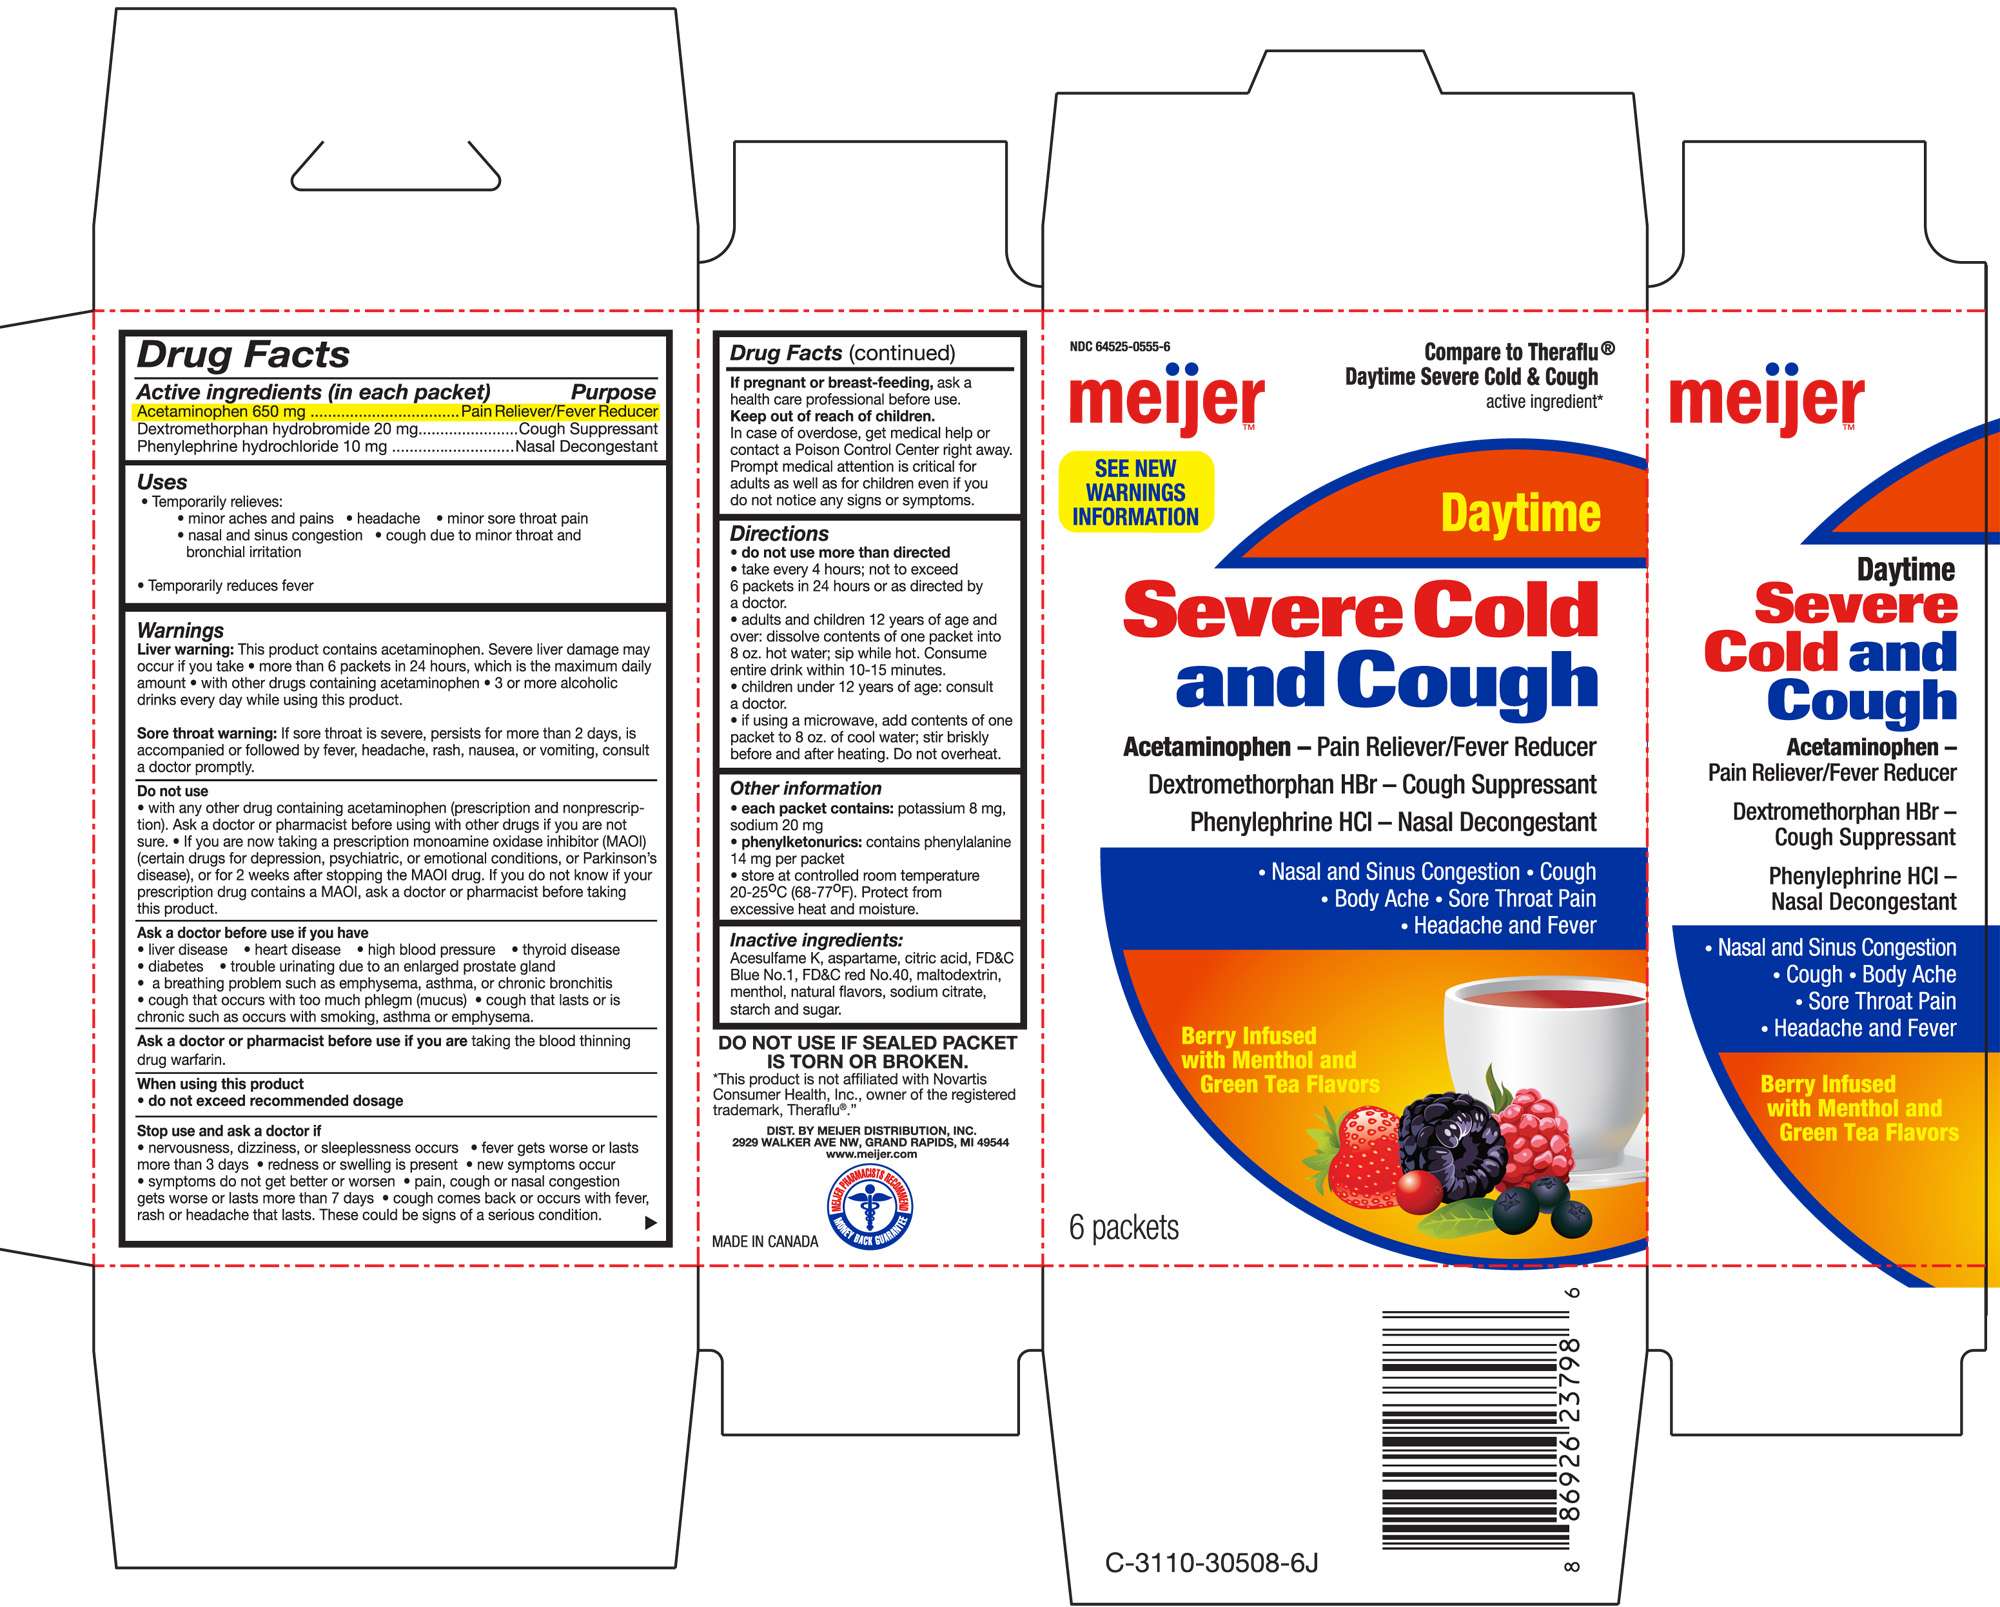 Meijer Daytime Severe Cold and Cough